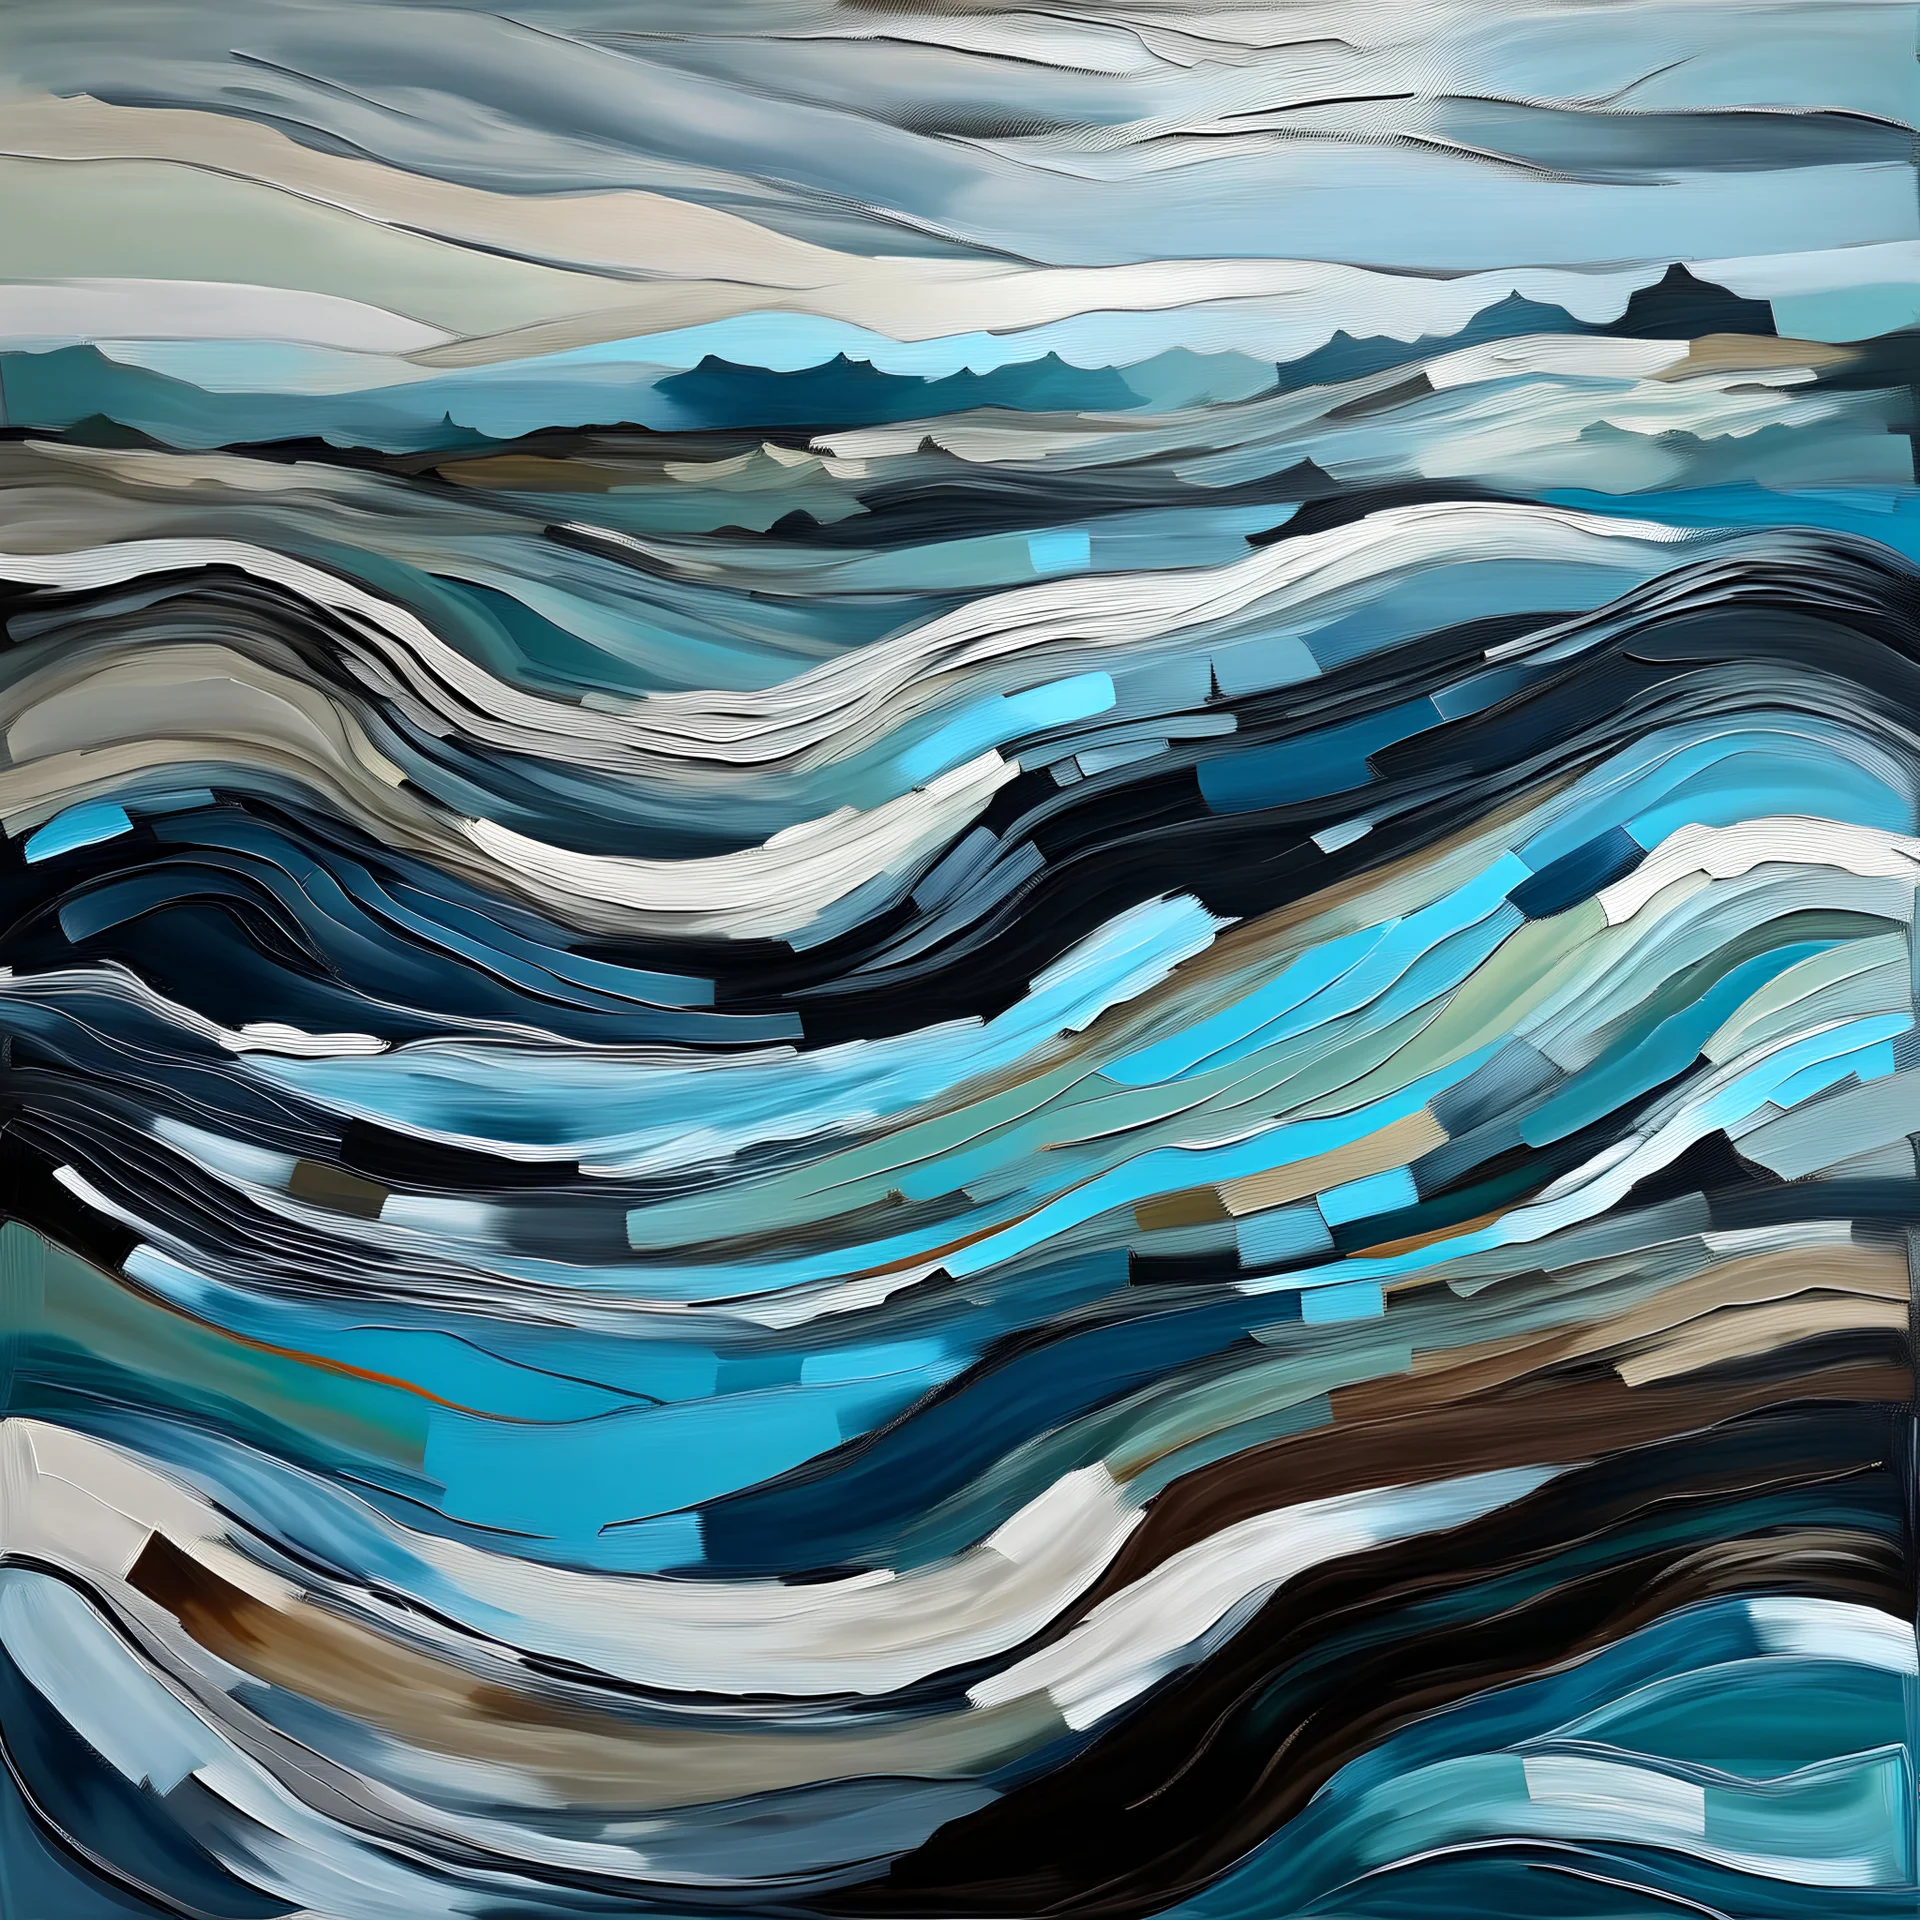 The abstract painting of a surreal, dreamlike landscape, which evokes a sense of mystery and introspection. The composition is divided into clear horizontal strips, each with its own textures, colors and shapes. At the bottom, undulating layers of earth tones and blues create a sense of depth and movement, reminiscent of a fragile body of water or a layered geological formation. This grounding base anchors the more ethereal elements above. From this base rises a lone, bare tree shown in silhou